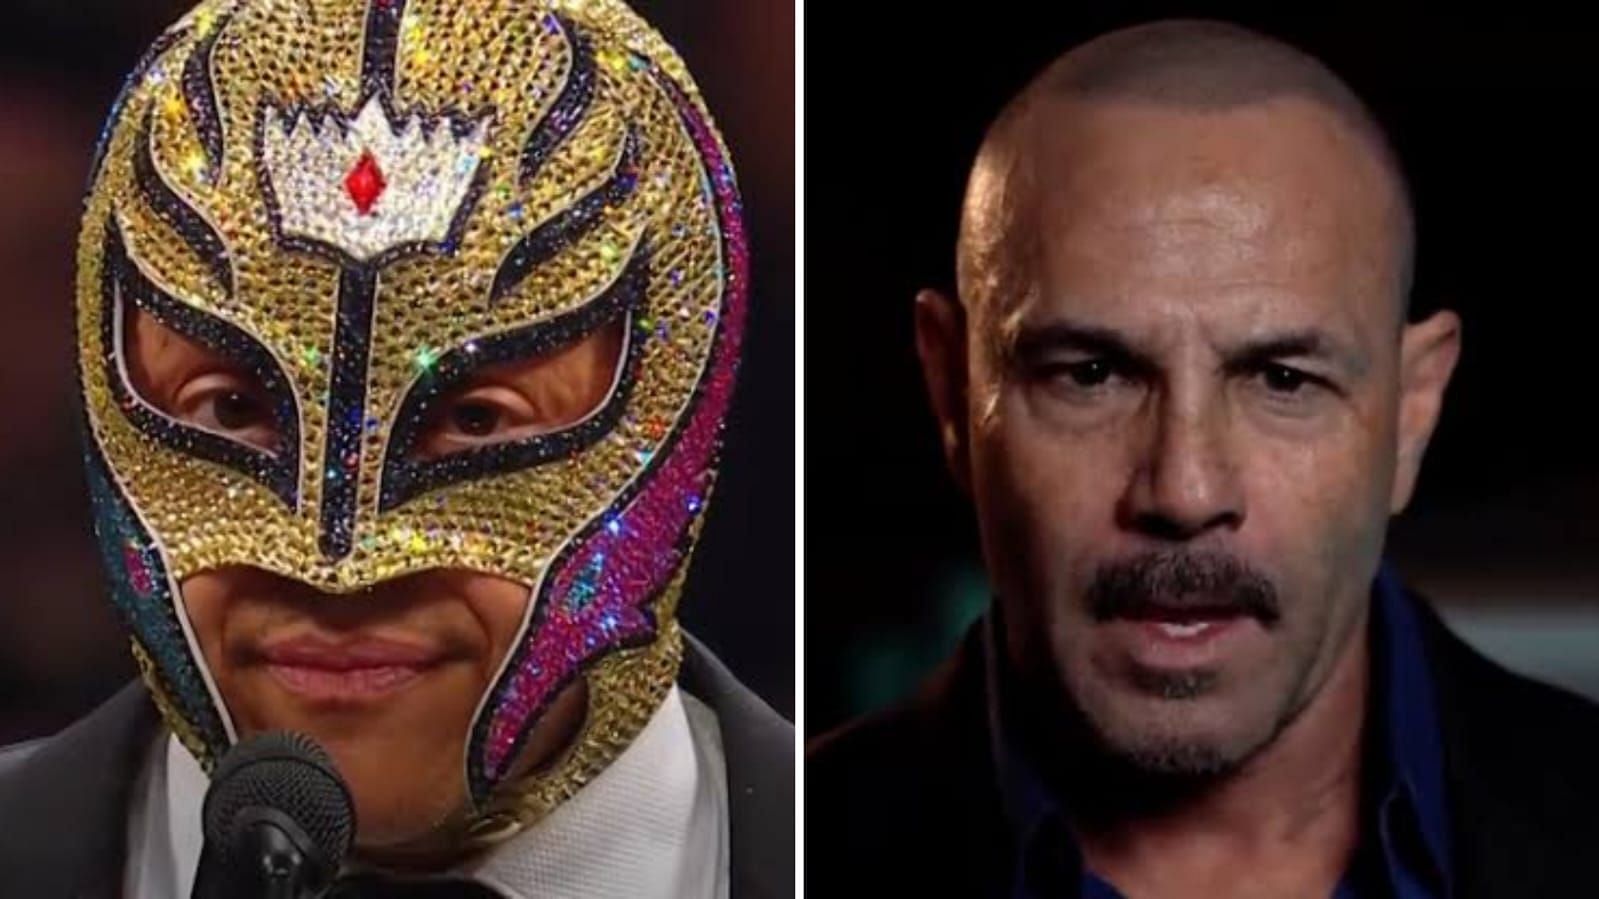 Chavo Guerrero recently trolled fans by tweeting against Rey Mysterio.